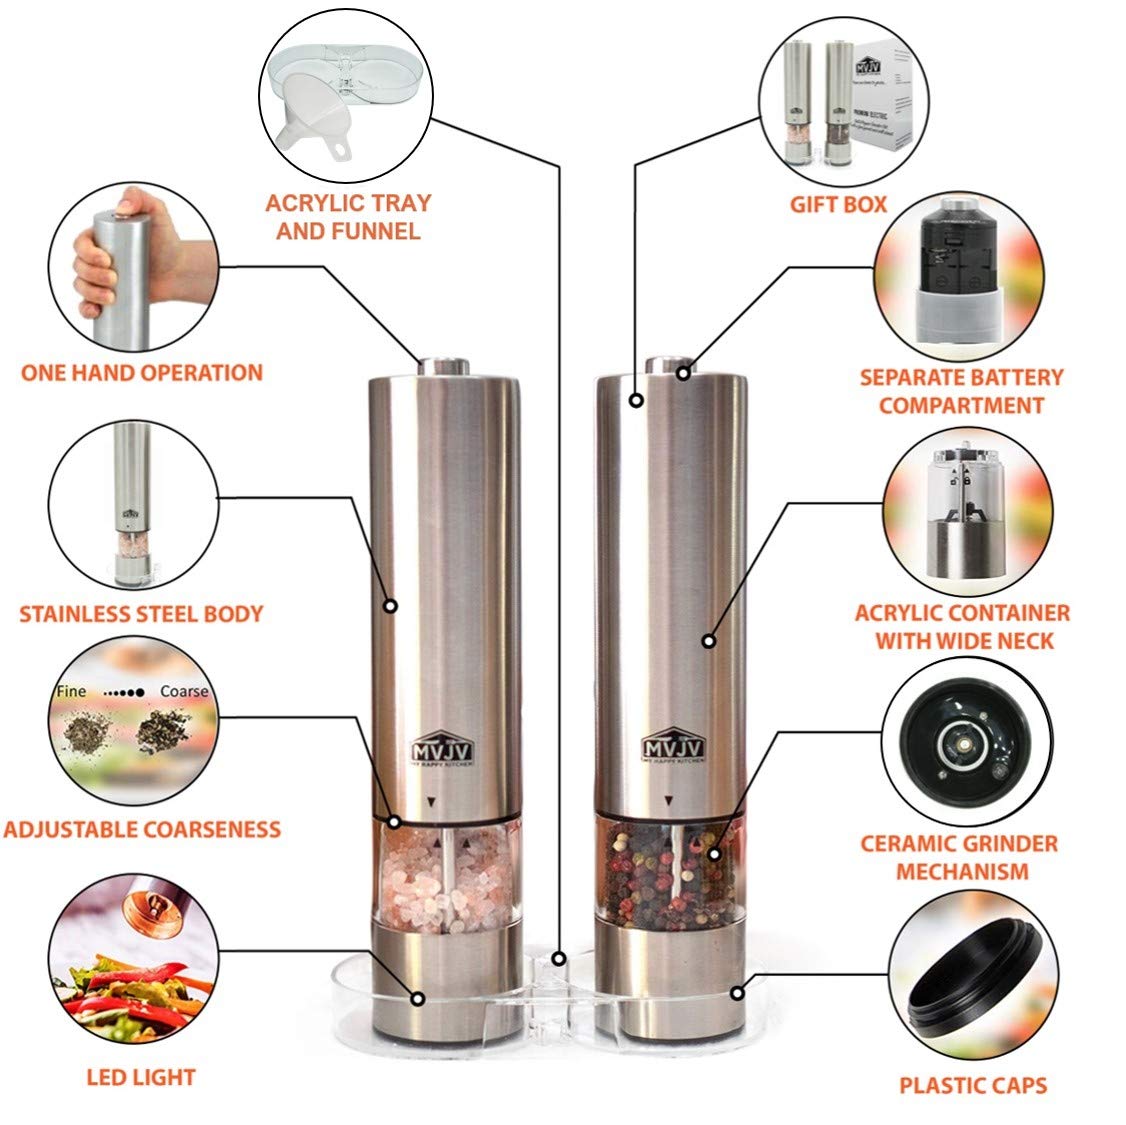 Electric Battery Operated Automatic Salt and Pepper Grinder Set - Stainless Steel and Acrylic Body | Tray Stand - Funnel - Mill Lids | LED Light | Adjustable Coarseness Ceramic Mill Shaker (2-Pack)